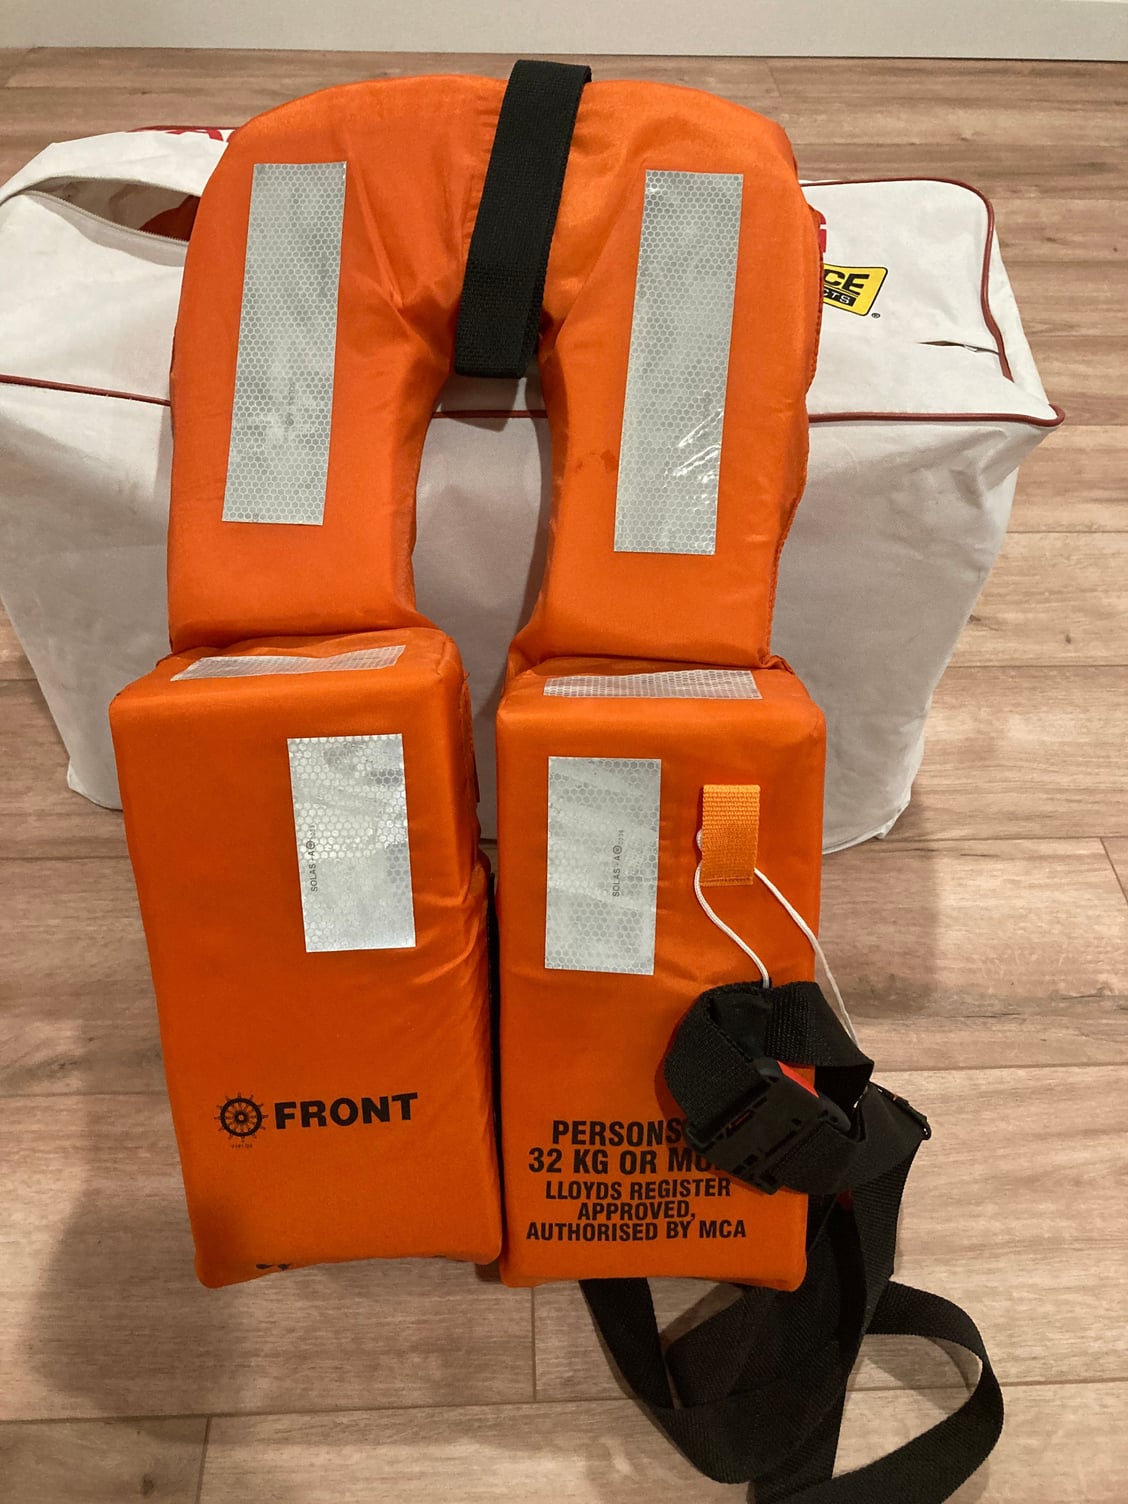 4 Type 1 offshore life jackets - The Hull Truth - Boating and Fishing Forum